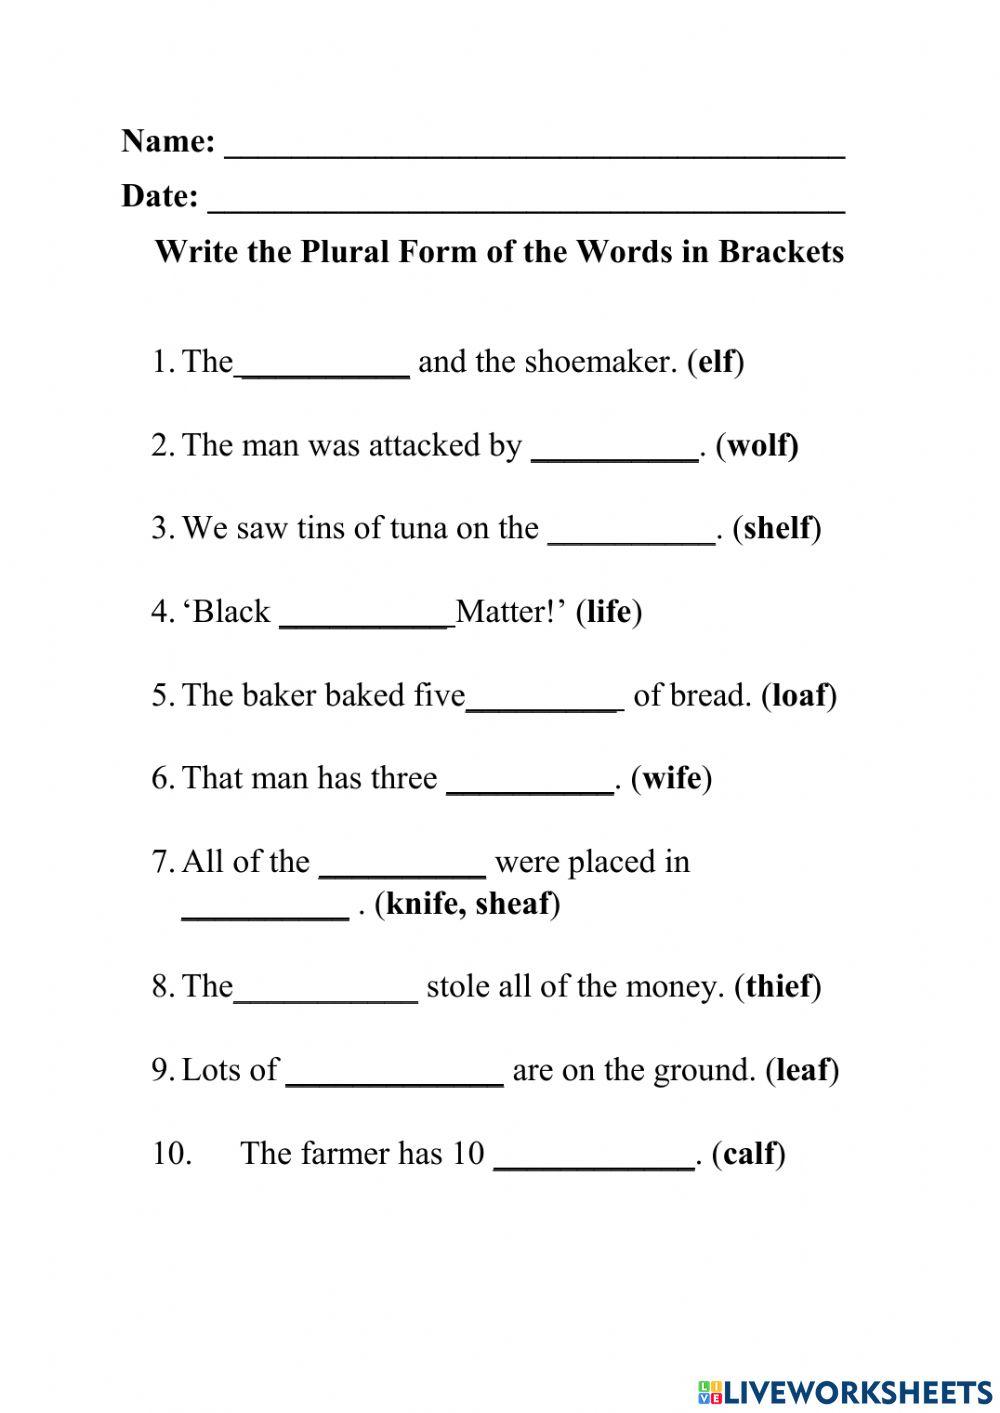 Plurals - Words That End in 'f' or 'fe'